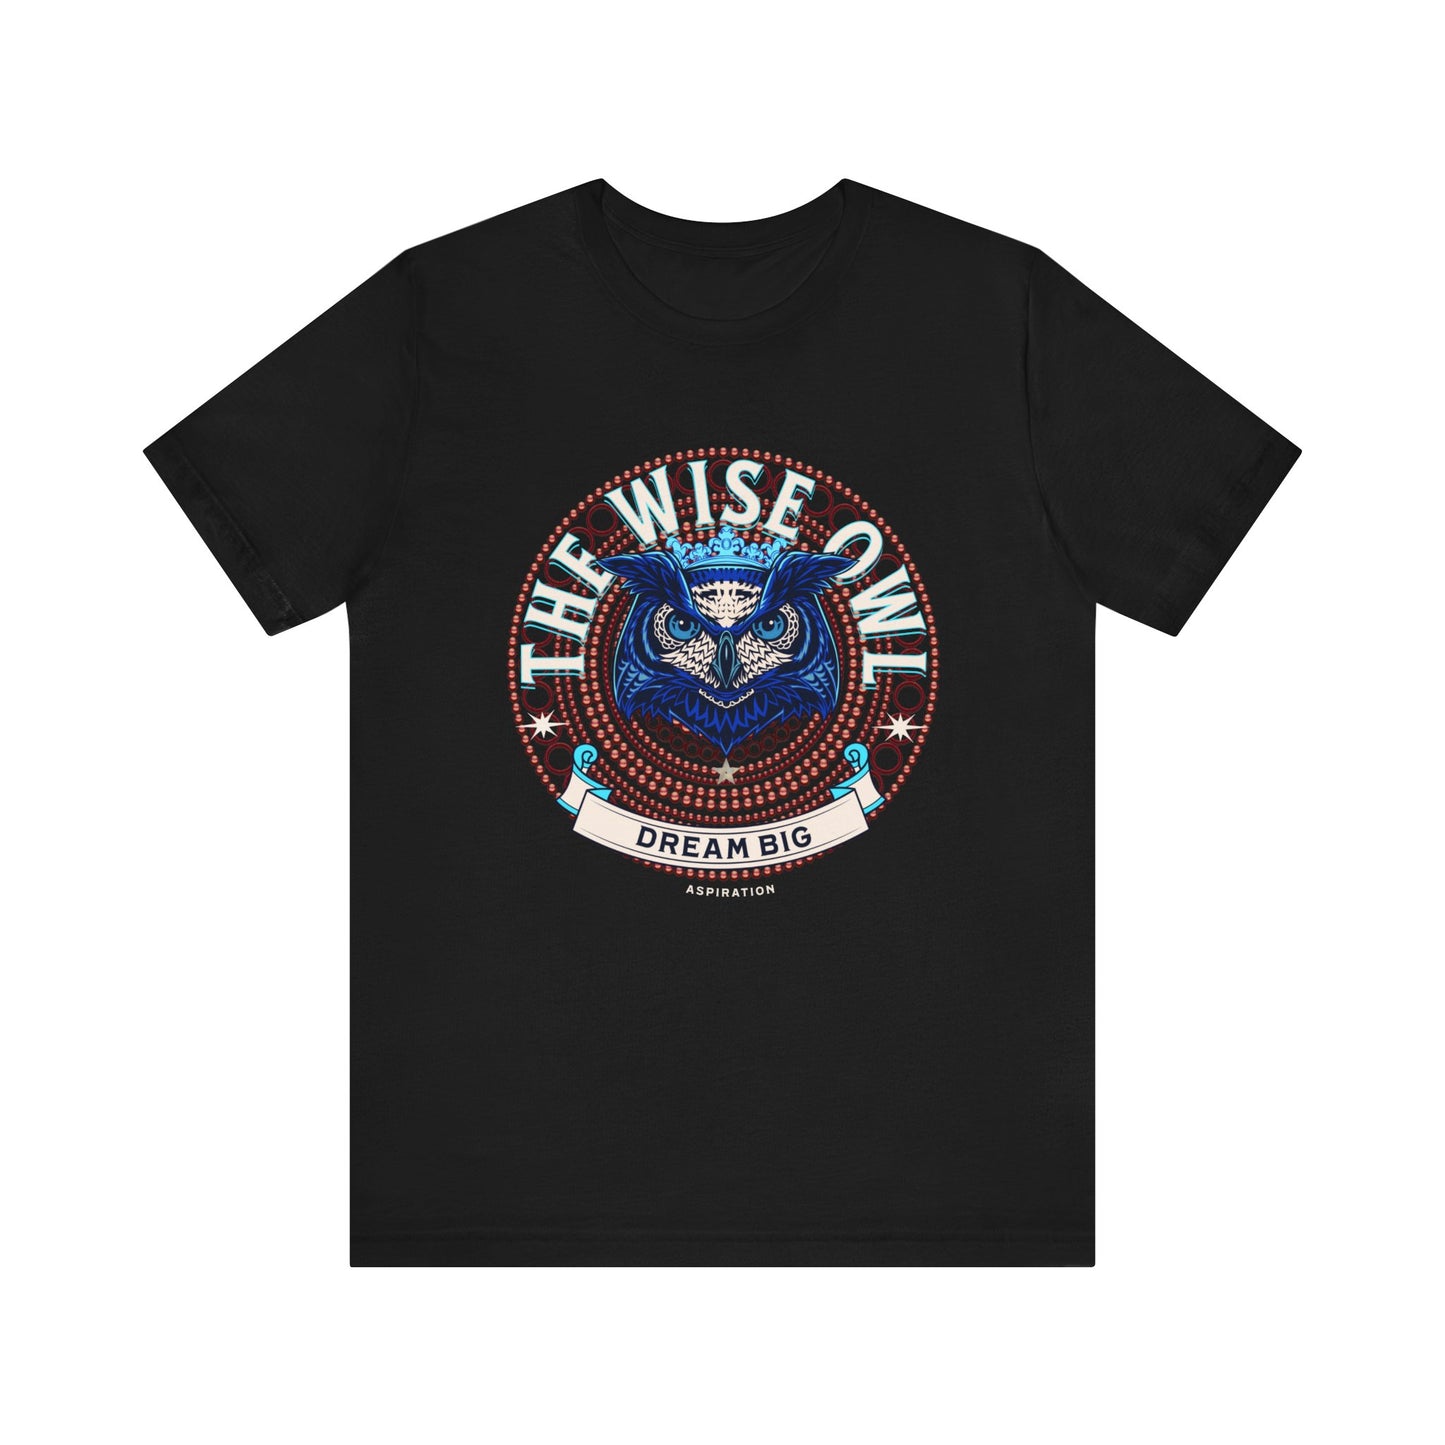 The Wise Owl T-shirt